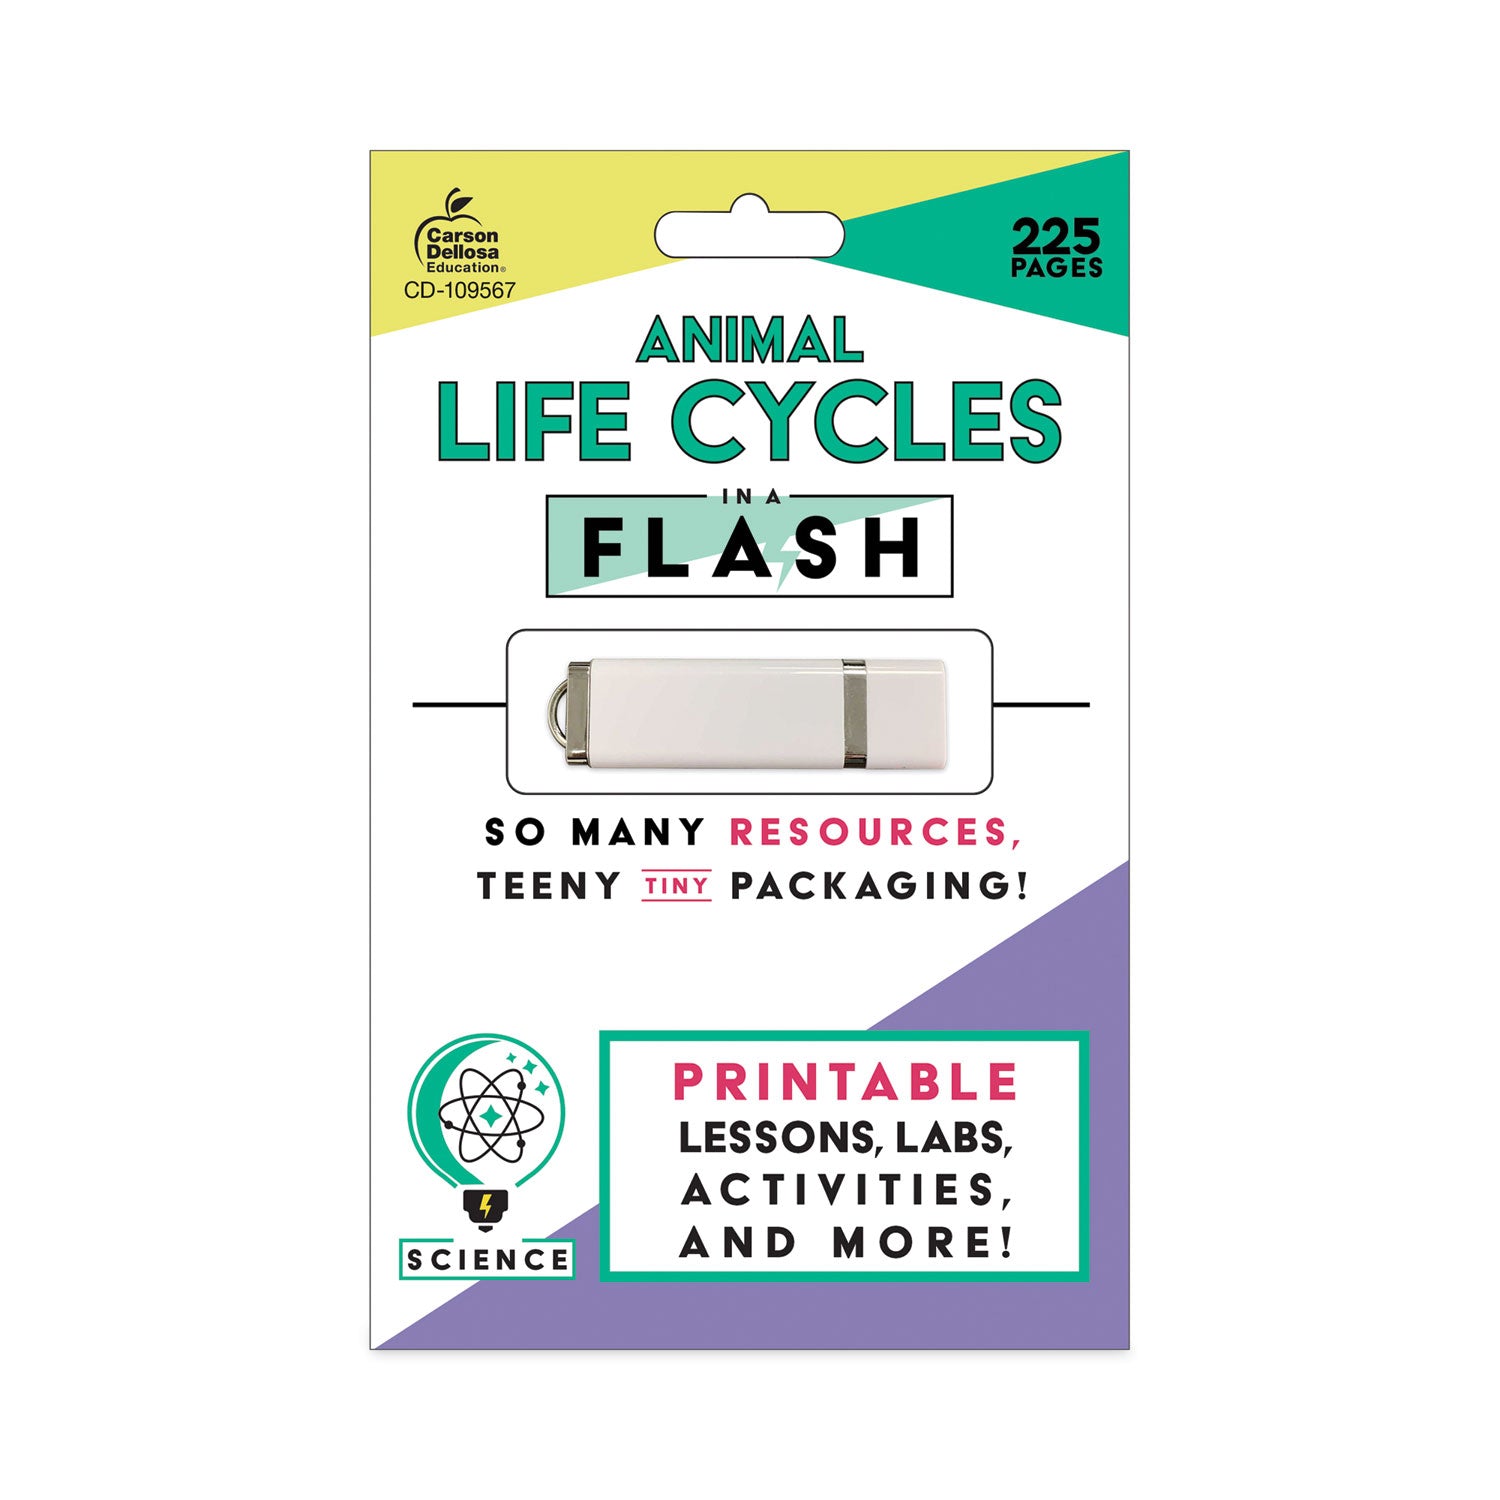 in-a-flash-usb-animal-lifestyles-ages-5-8-225-pages_cdp109567 - 1